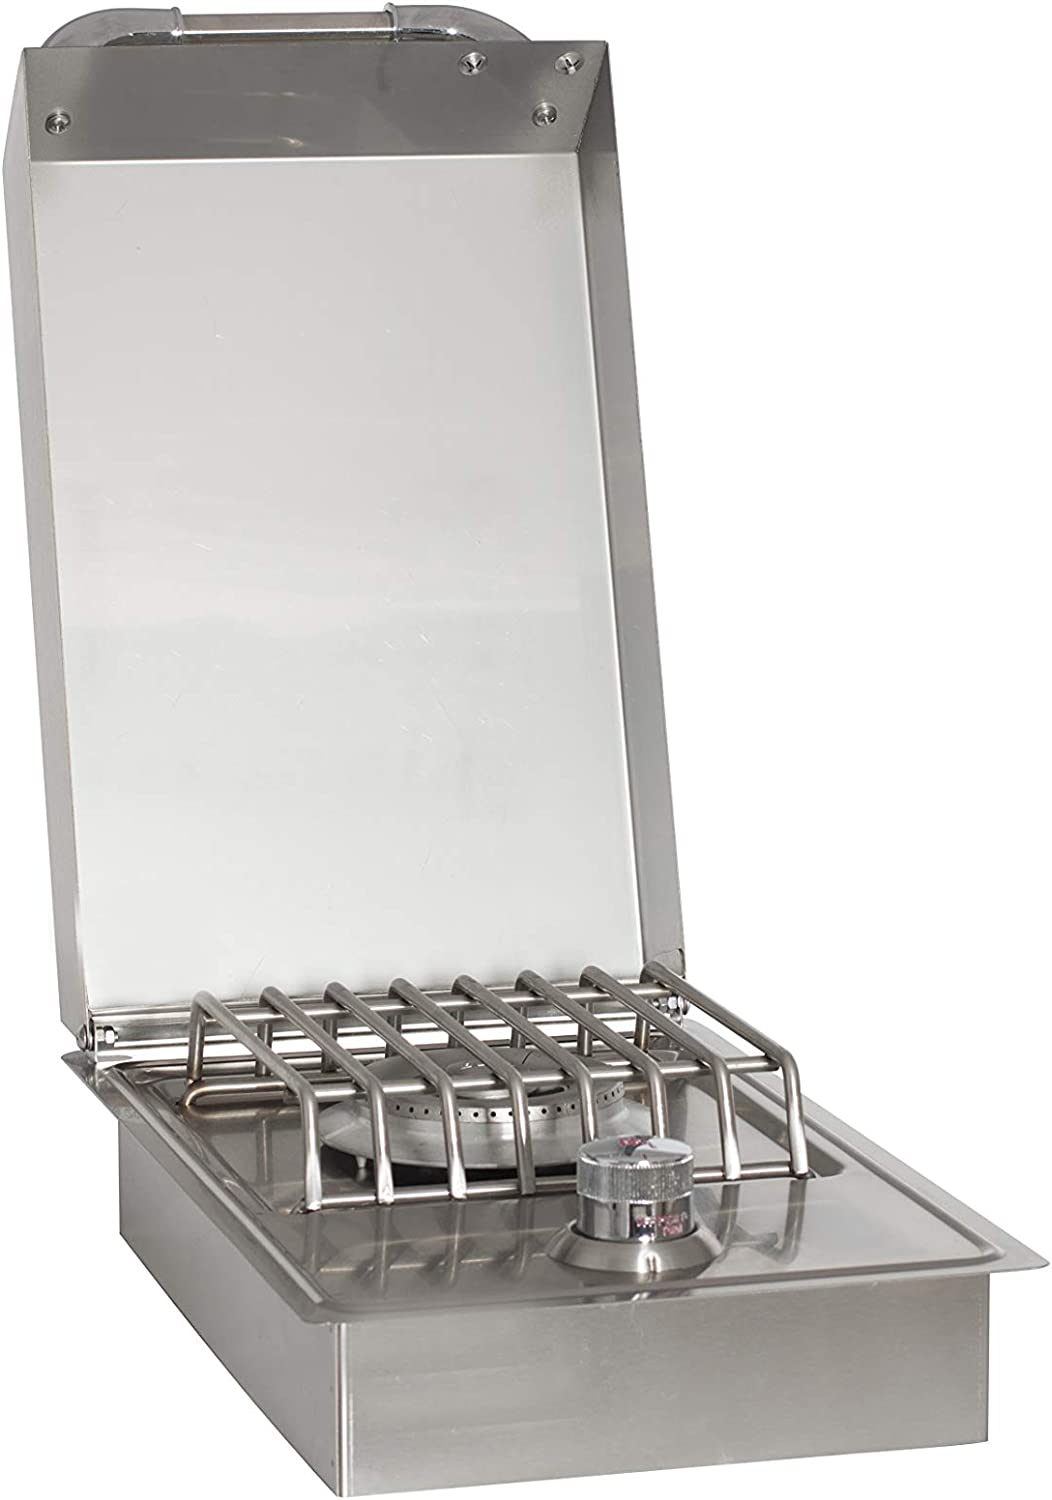 Bull Outdoor Products 60008 Stainless Steel Single Side Burner, Liquid Propane , Gray